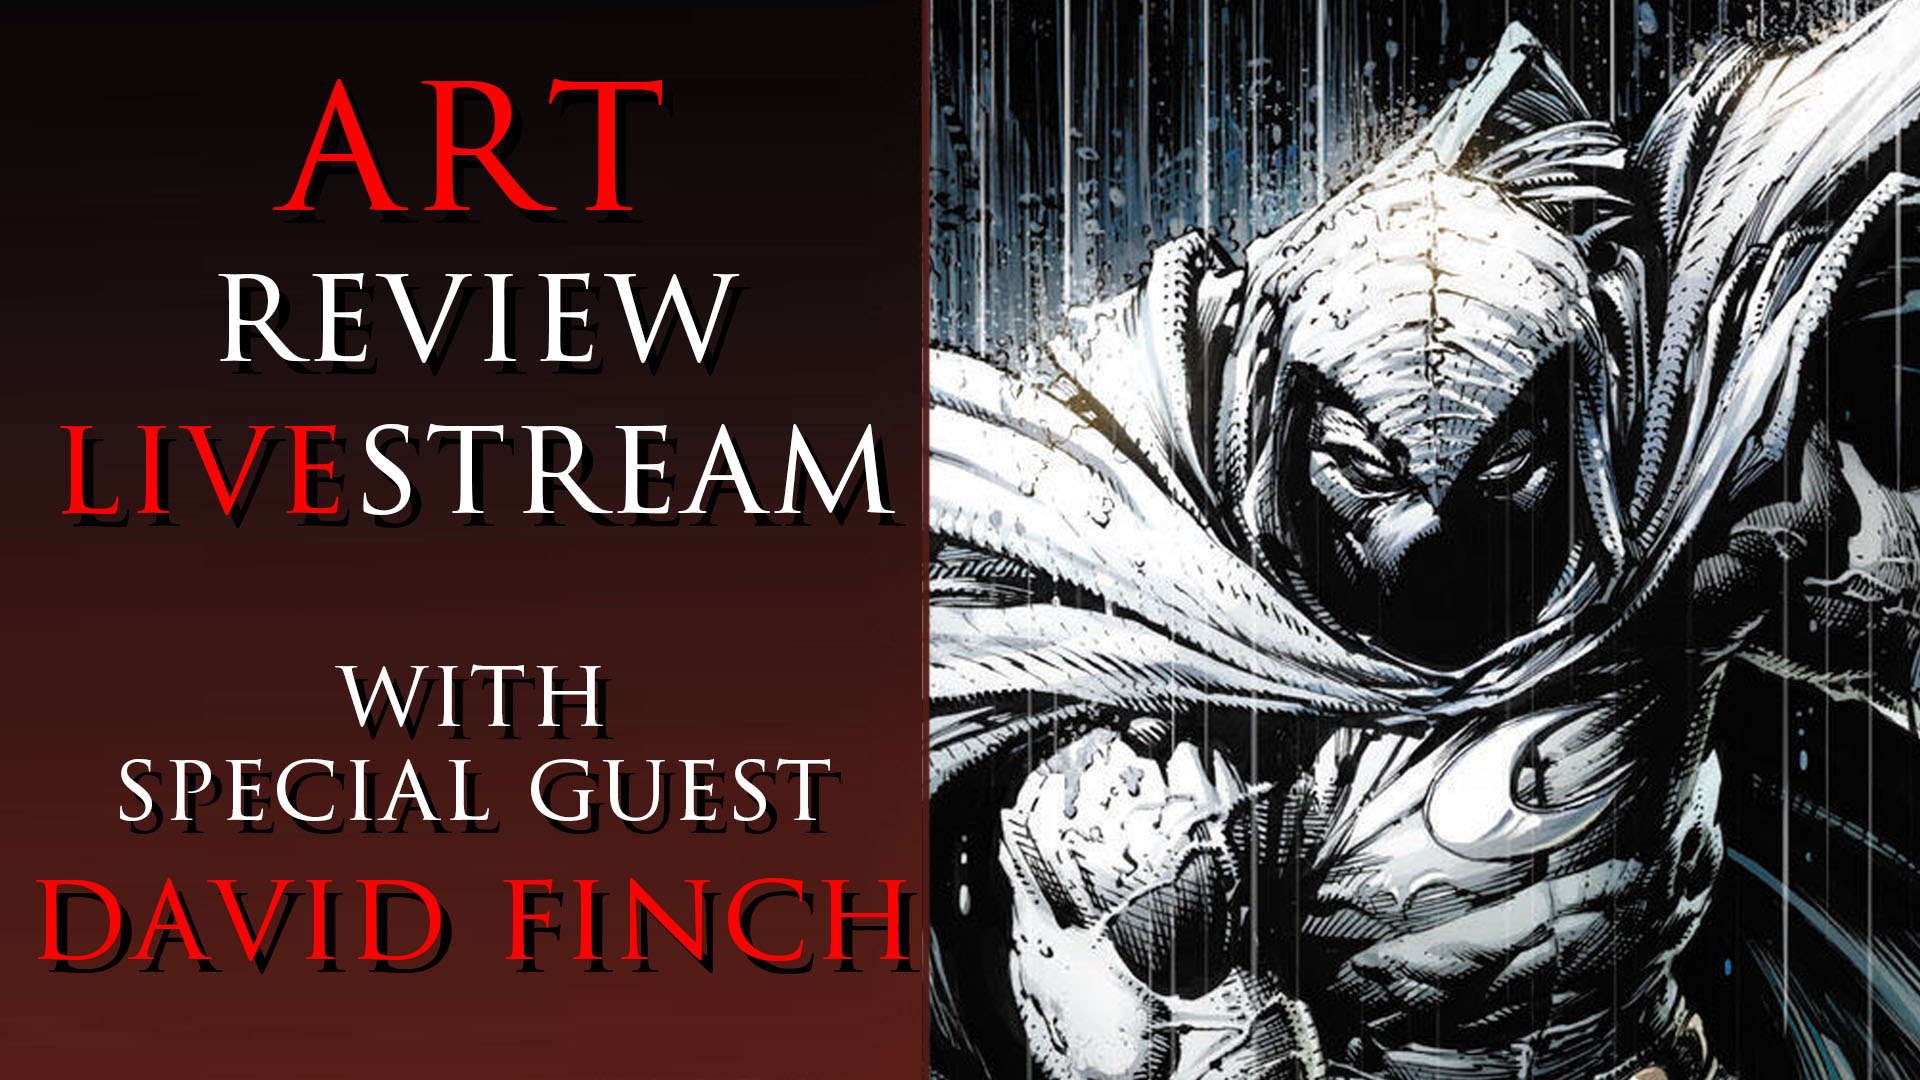 Art Review Livestream with Special Guest David Finch